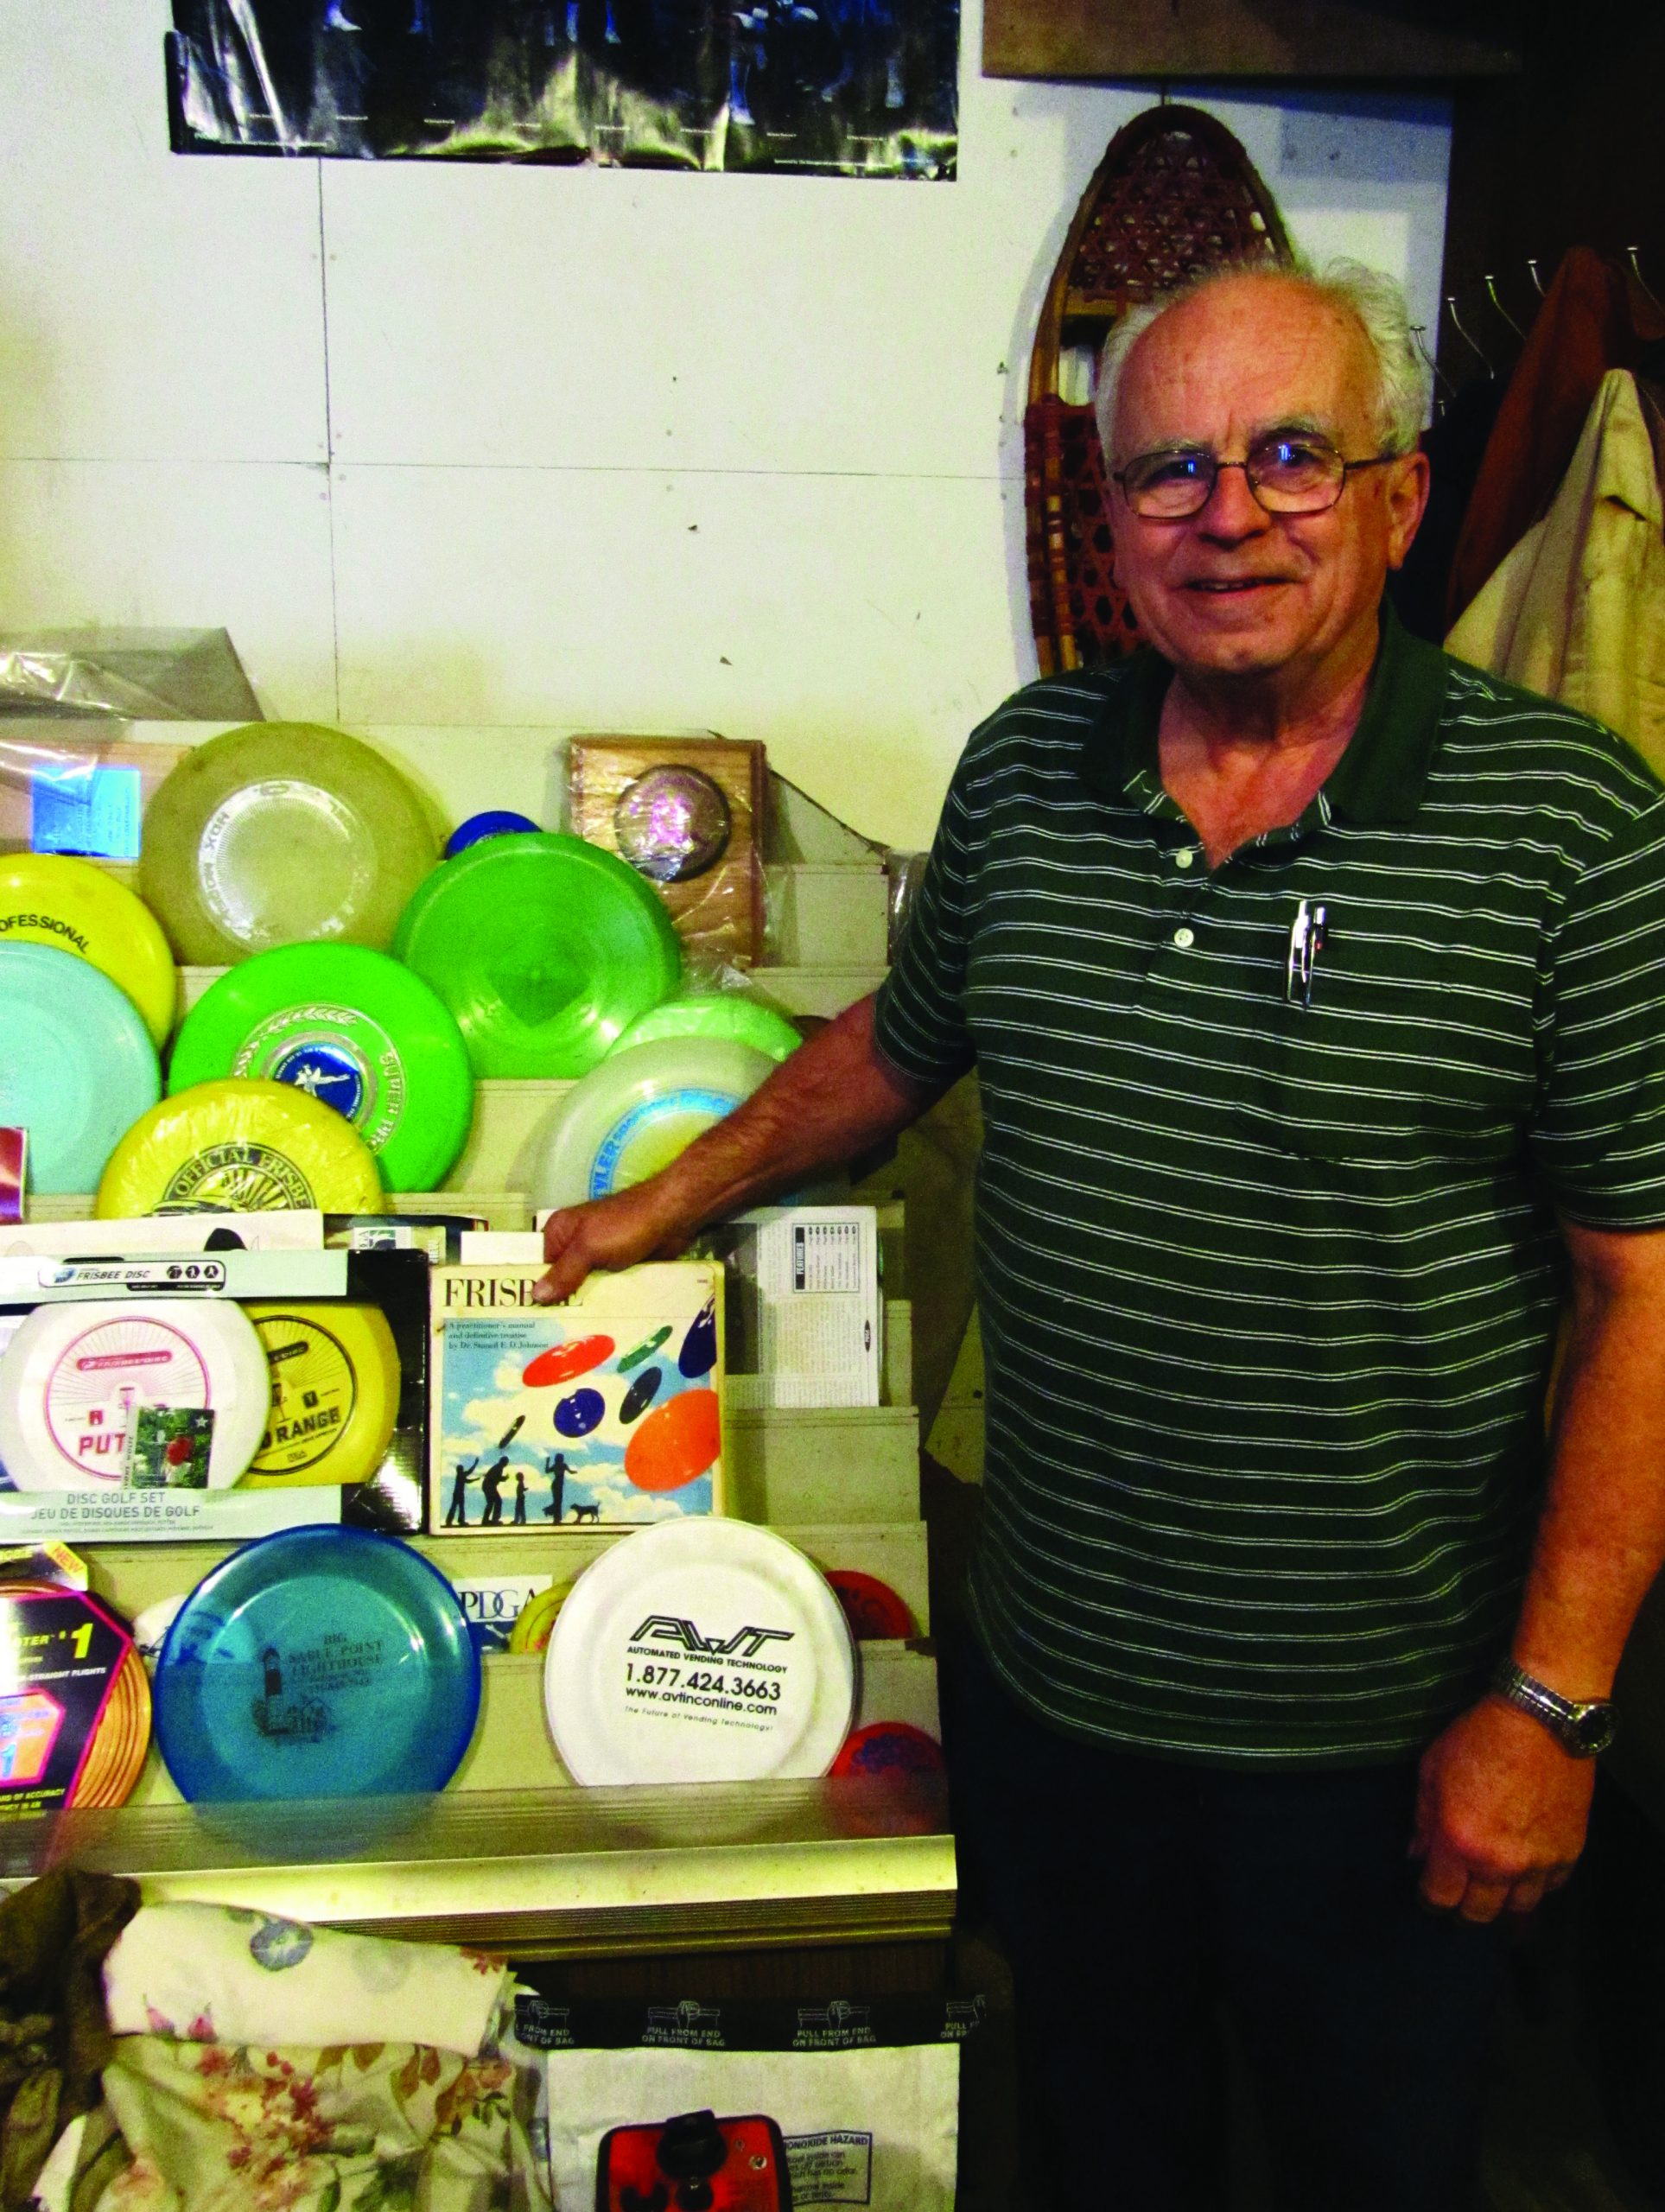 Jim Ingold stands next to his large Frisbee collection